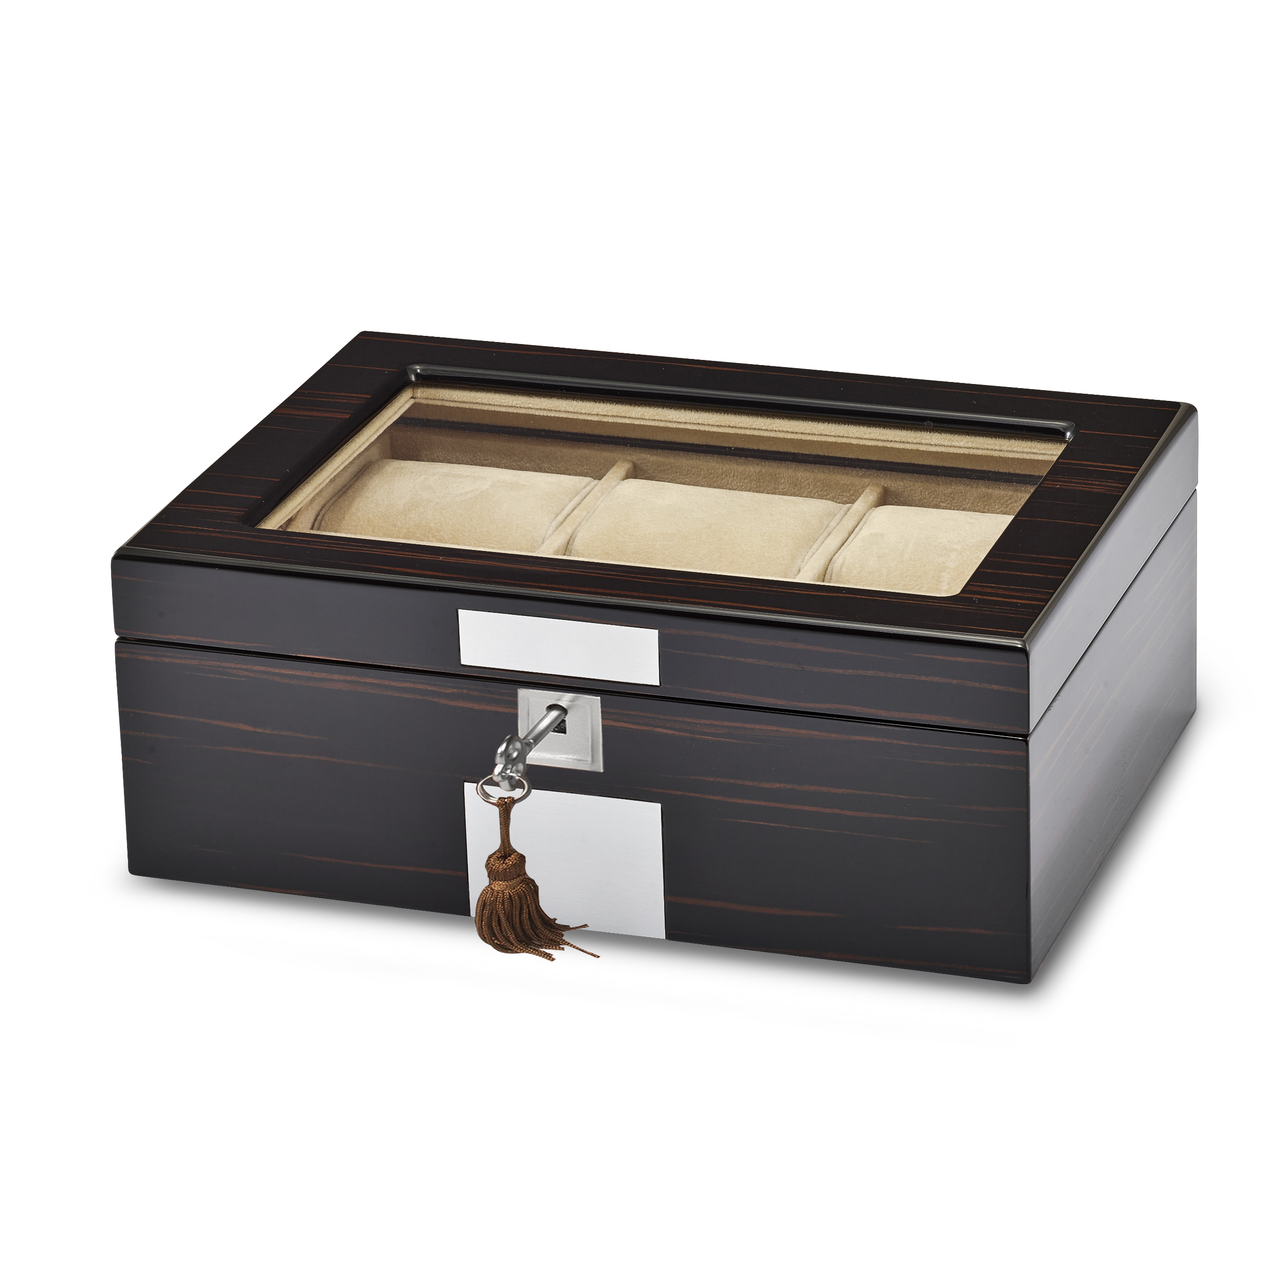 High Gloss Ebony Veneer Watch Jewelry Box with Lift-out Tray by Jere